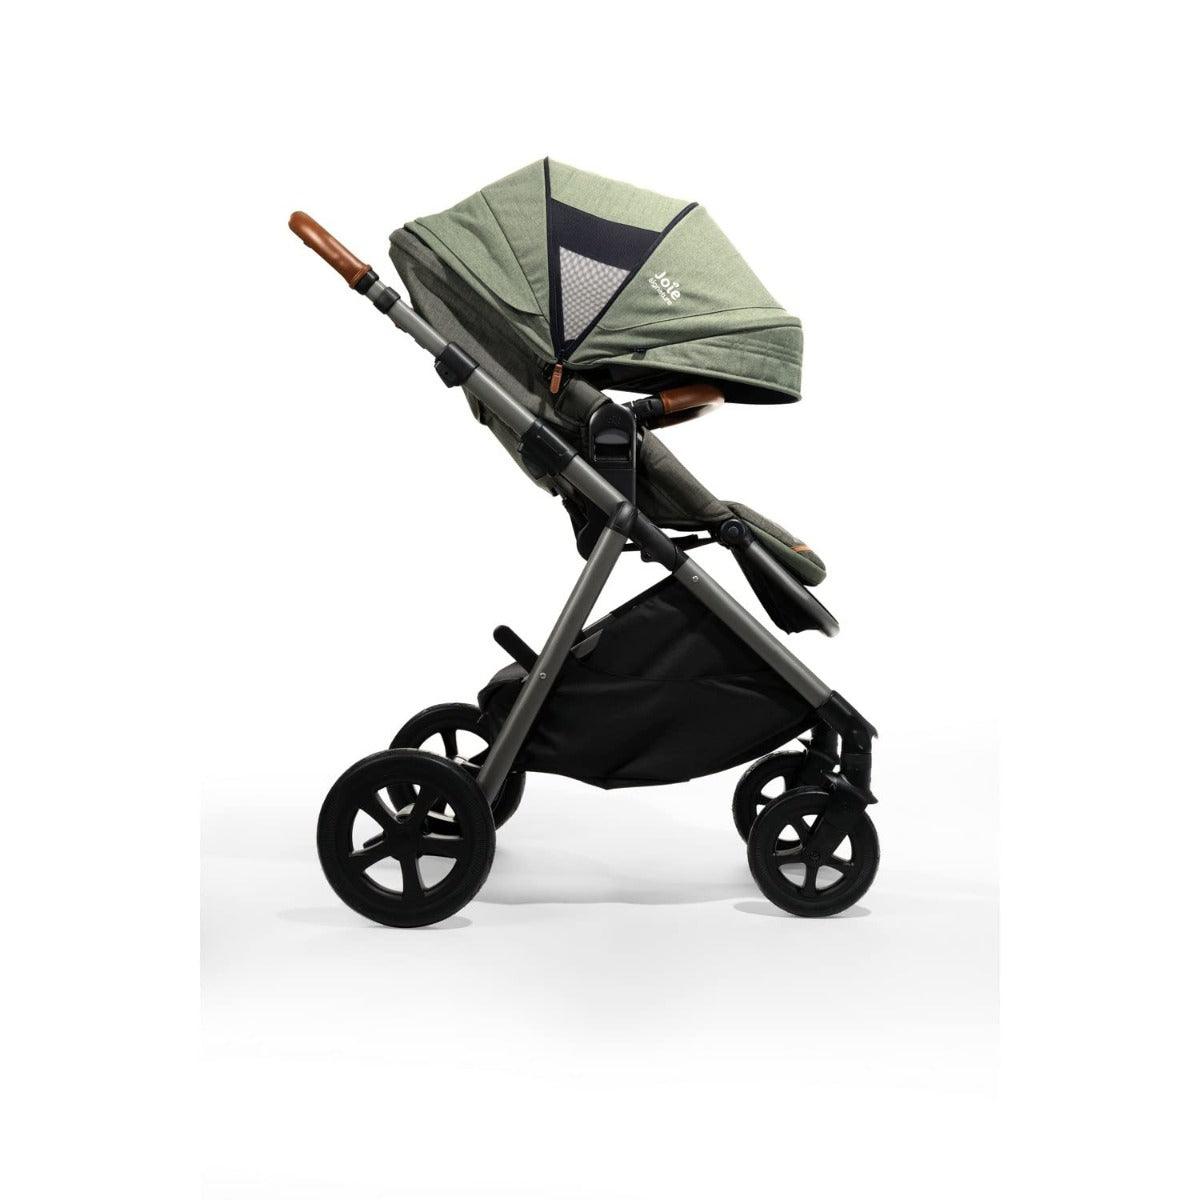 Joie Aeria 4 in 1 Baby Pram with Height Adjustable Seat & Rain Cover - Baby Stroller for Ages 0-4 Years